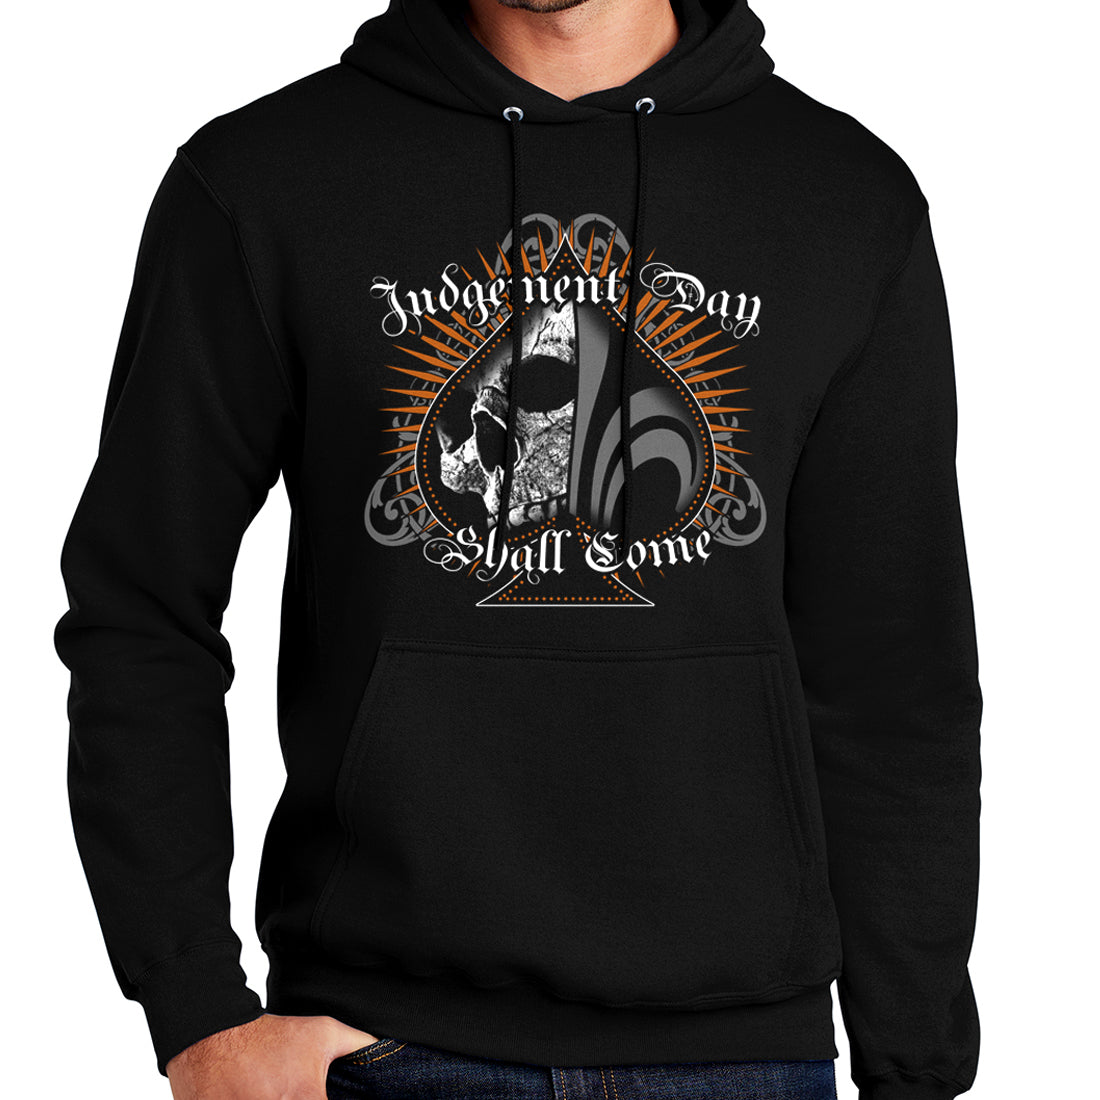 Judgement Day Shall Come / Ace of Spades - Pull Over Hoodie - Black